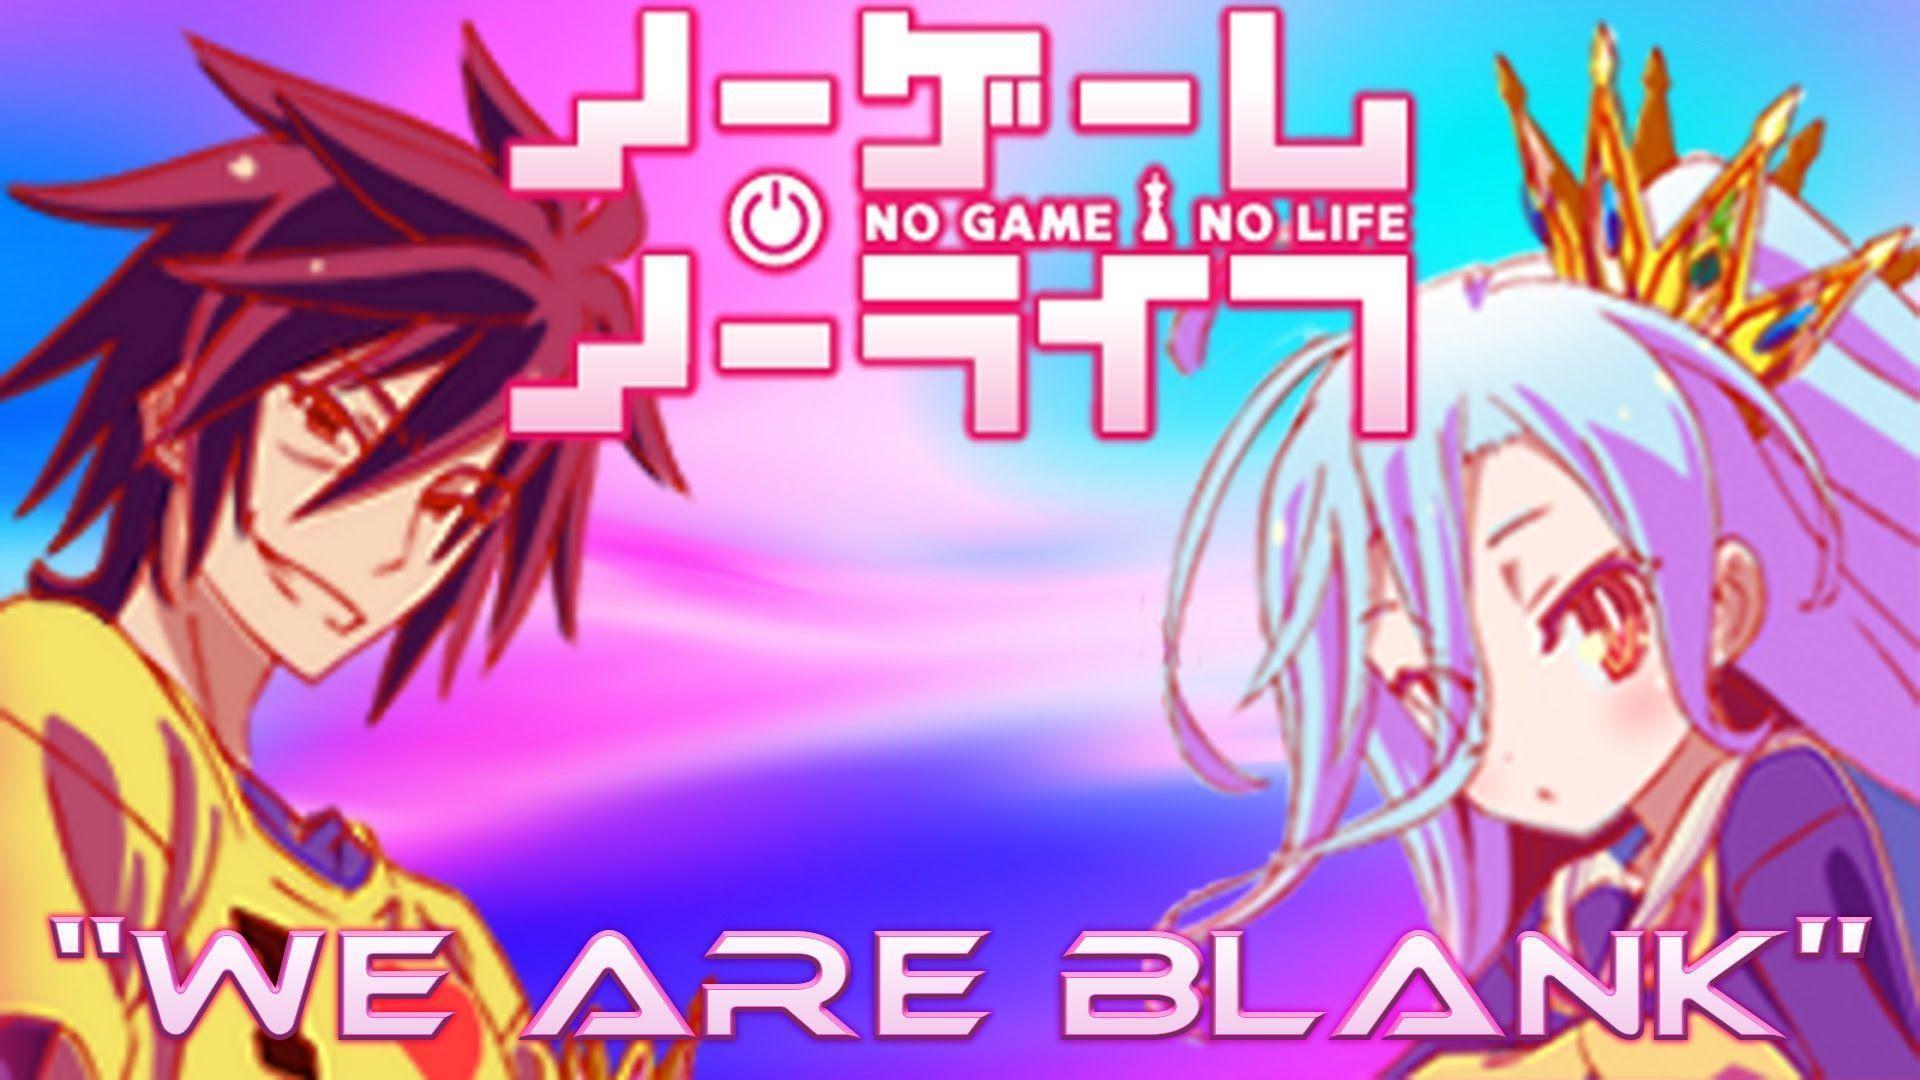 Live Wallpaper. No Game No Life "We are Blank"